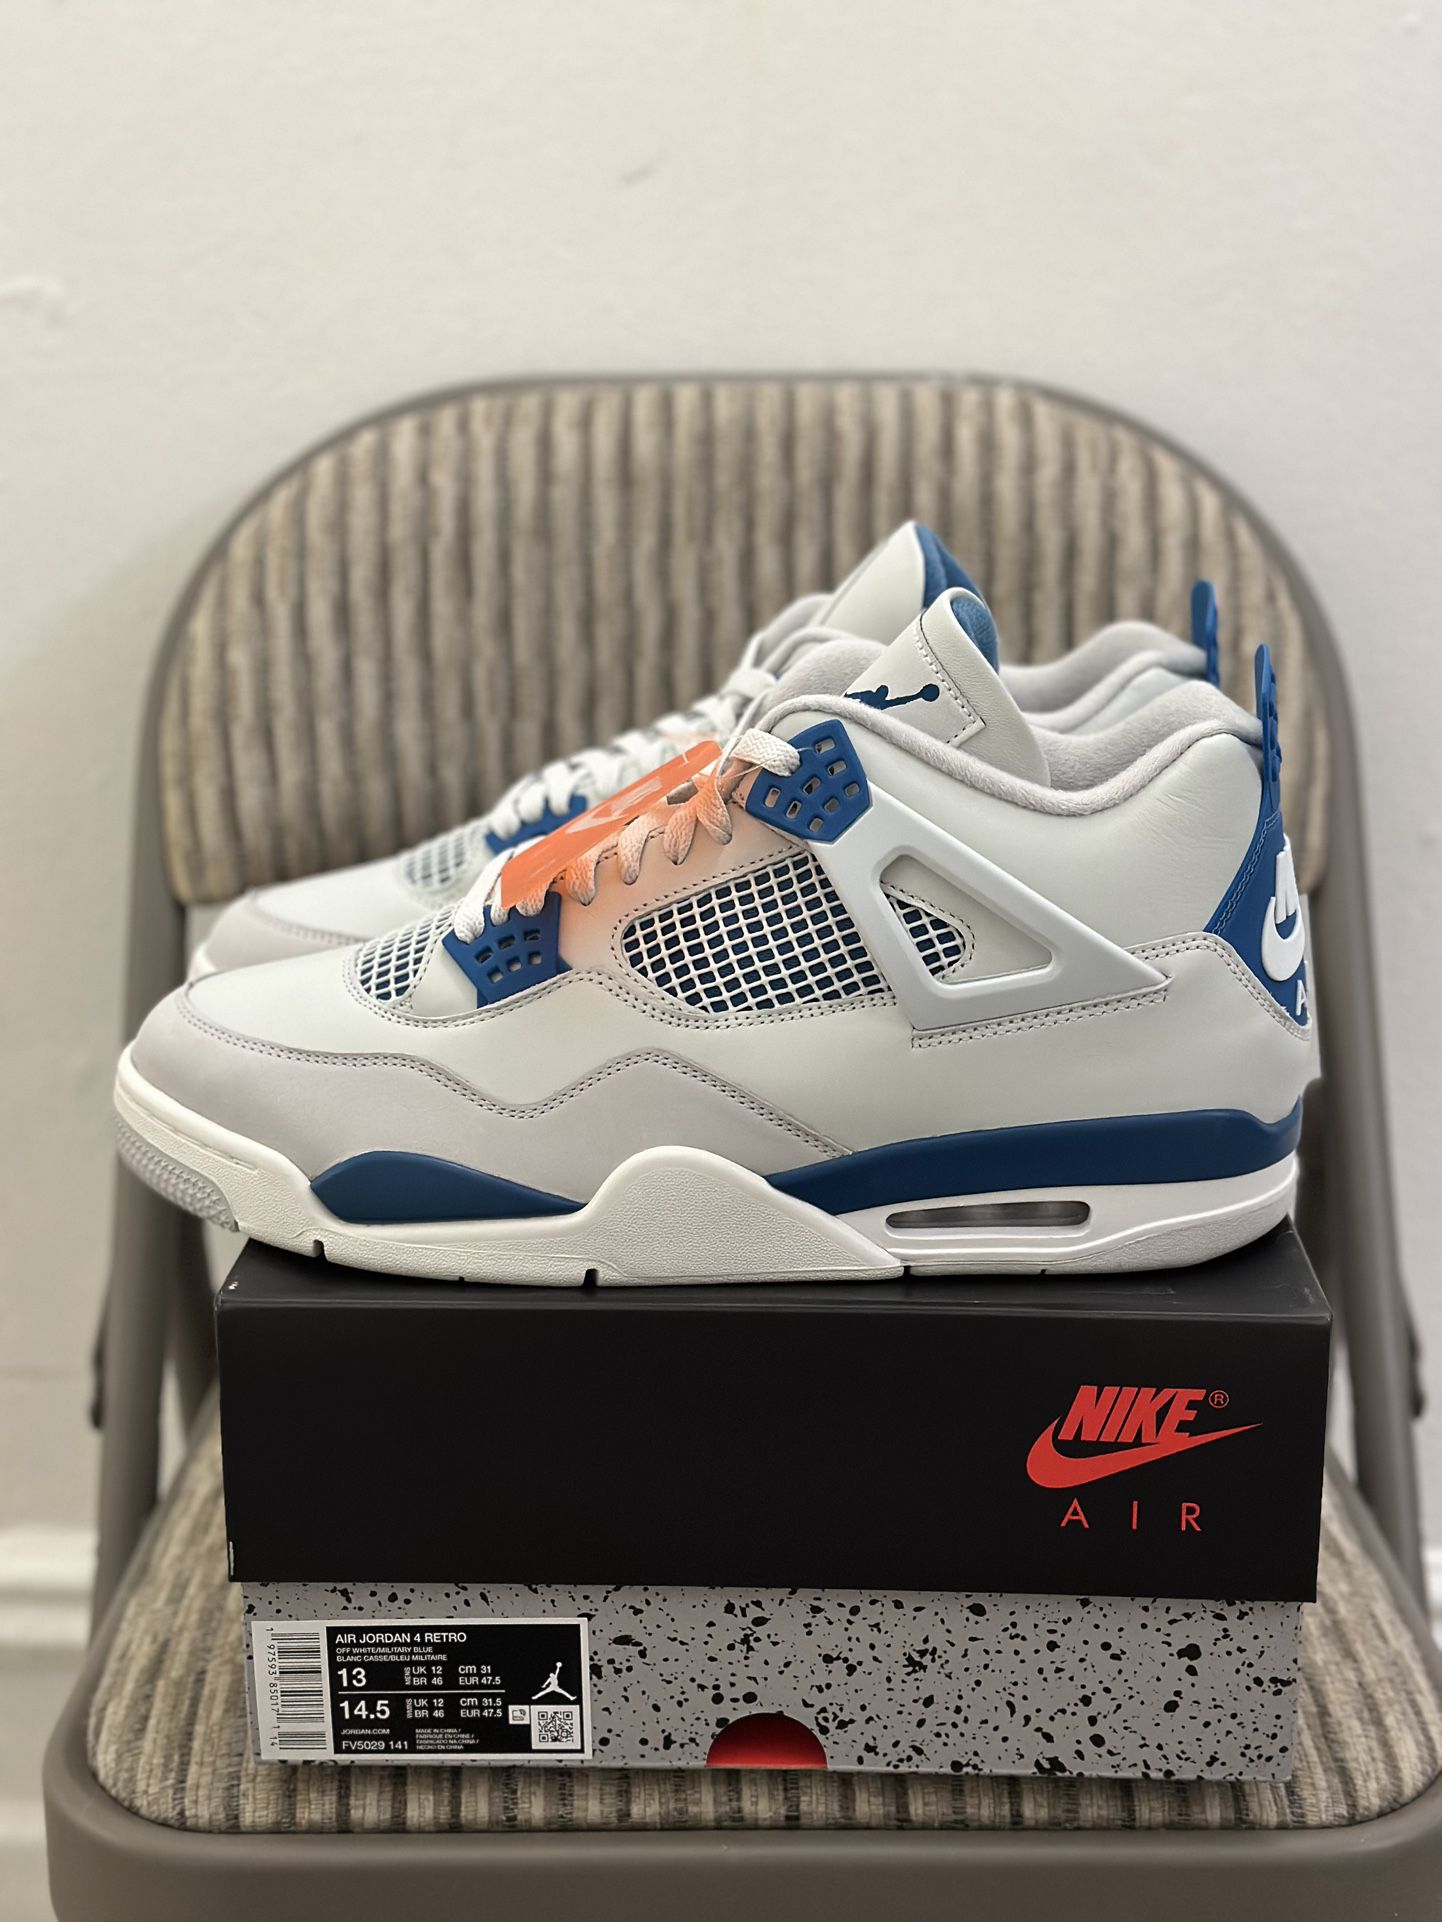 Air Jordan 4 Industrial Blue - Size 13 - NYC Only 